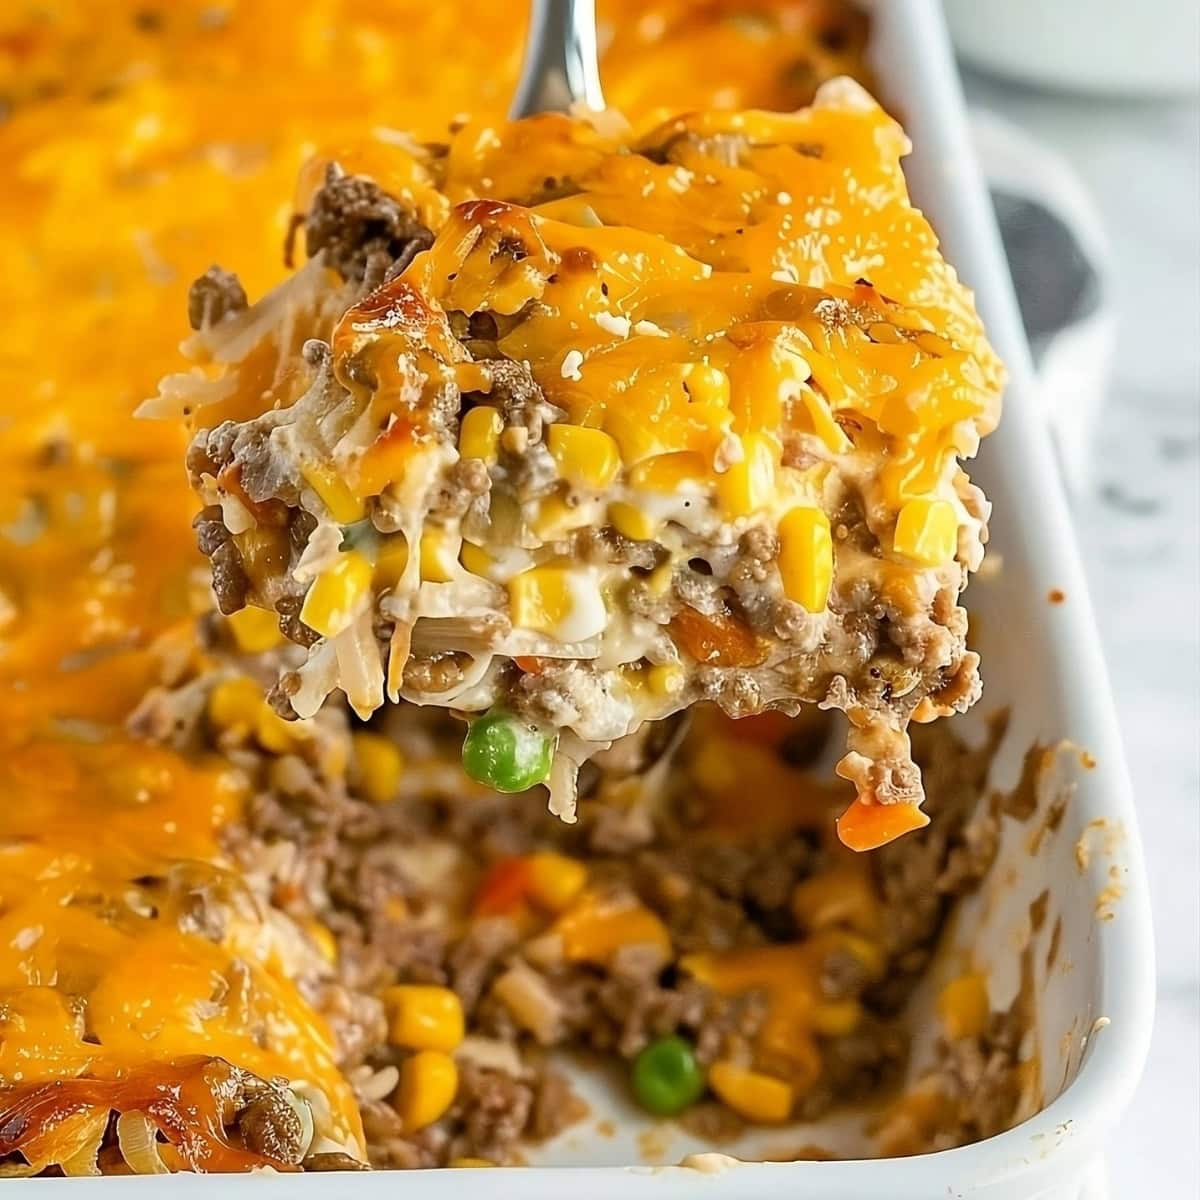 Hamburger hashbrown casserole with corn, carrots, green peas and melted cheese on top.